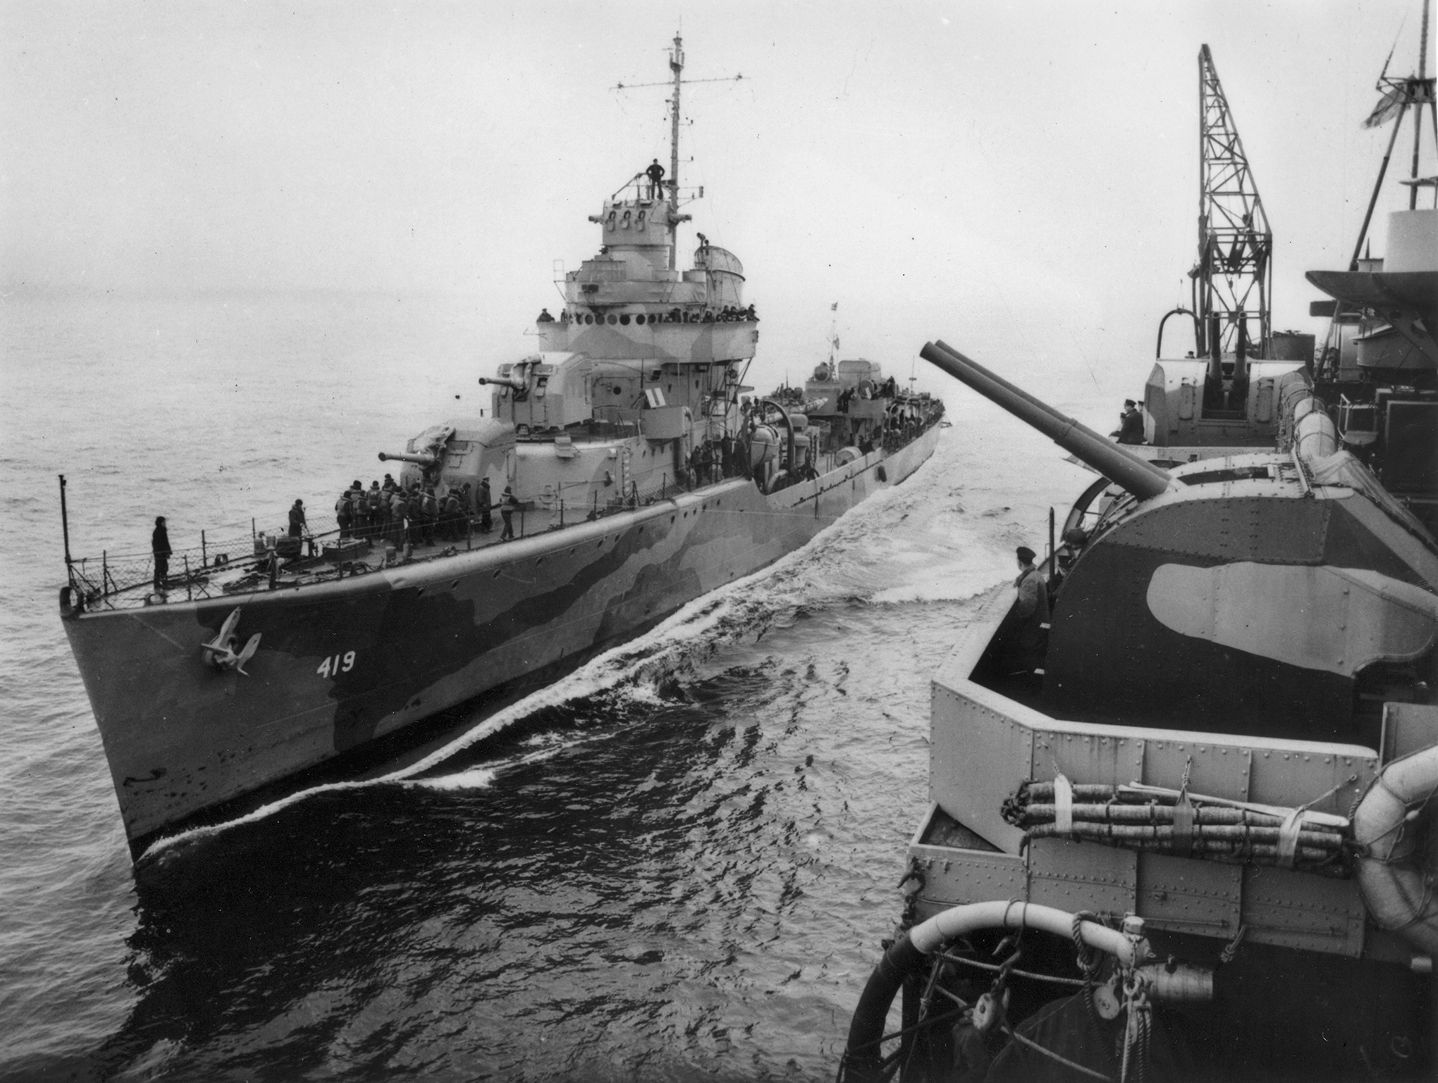 The destroyer USS Wainwright comes alongside another warship to take on fuel. During its escort duties with Convoy PQ-17, Wainwright was instrumental in beating back German air attacks.